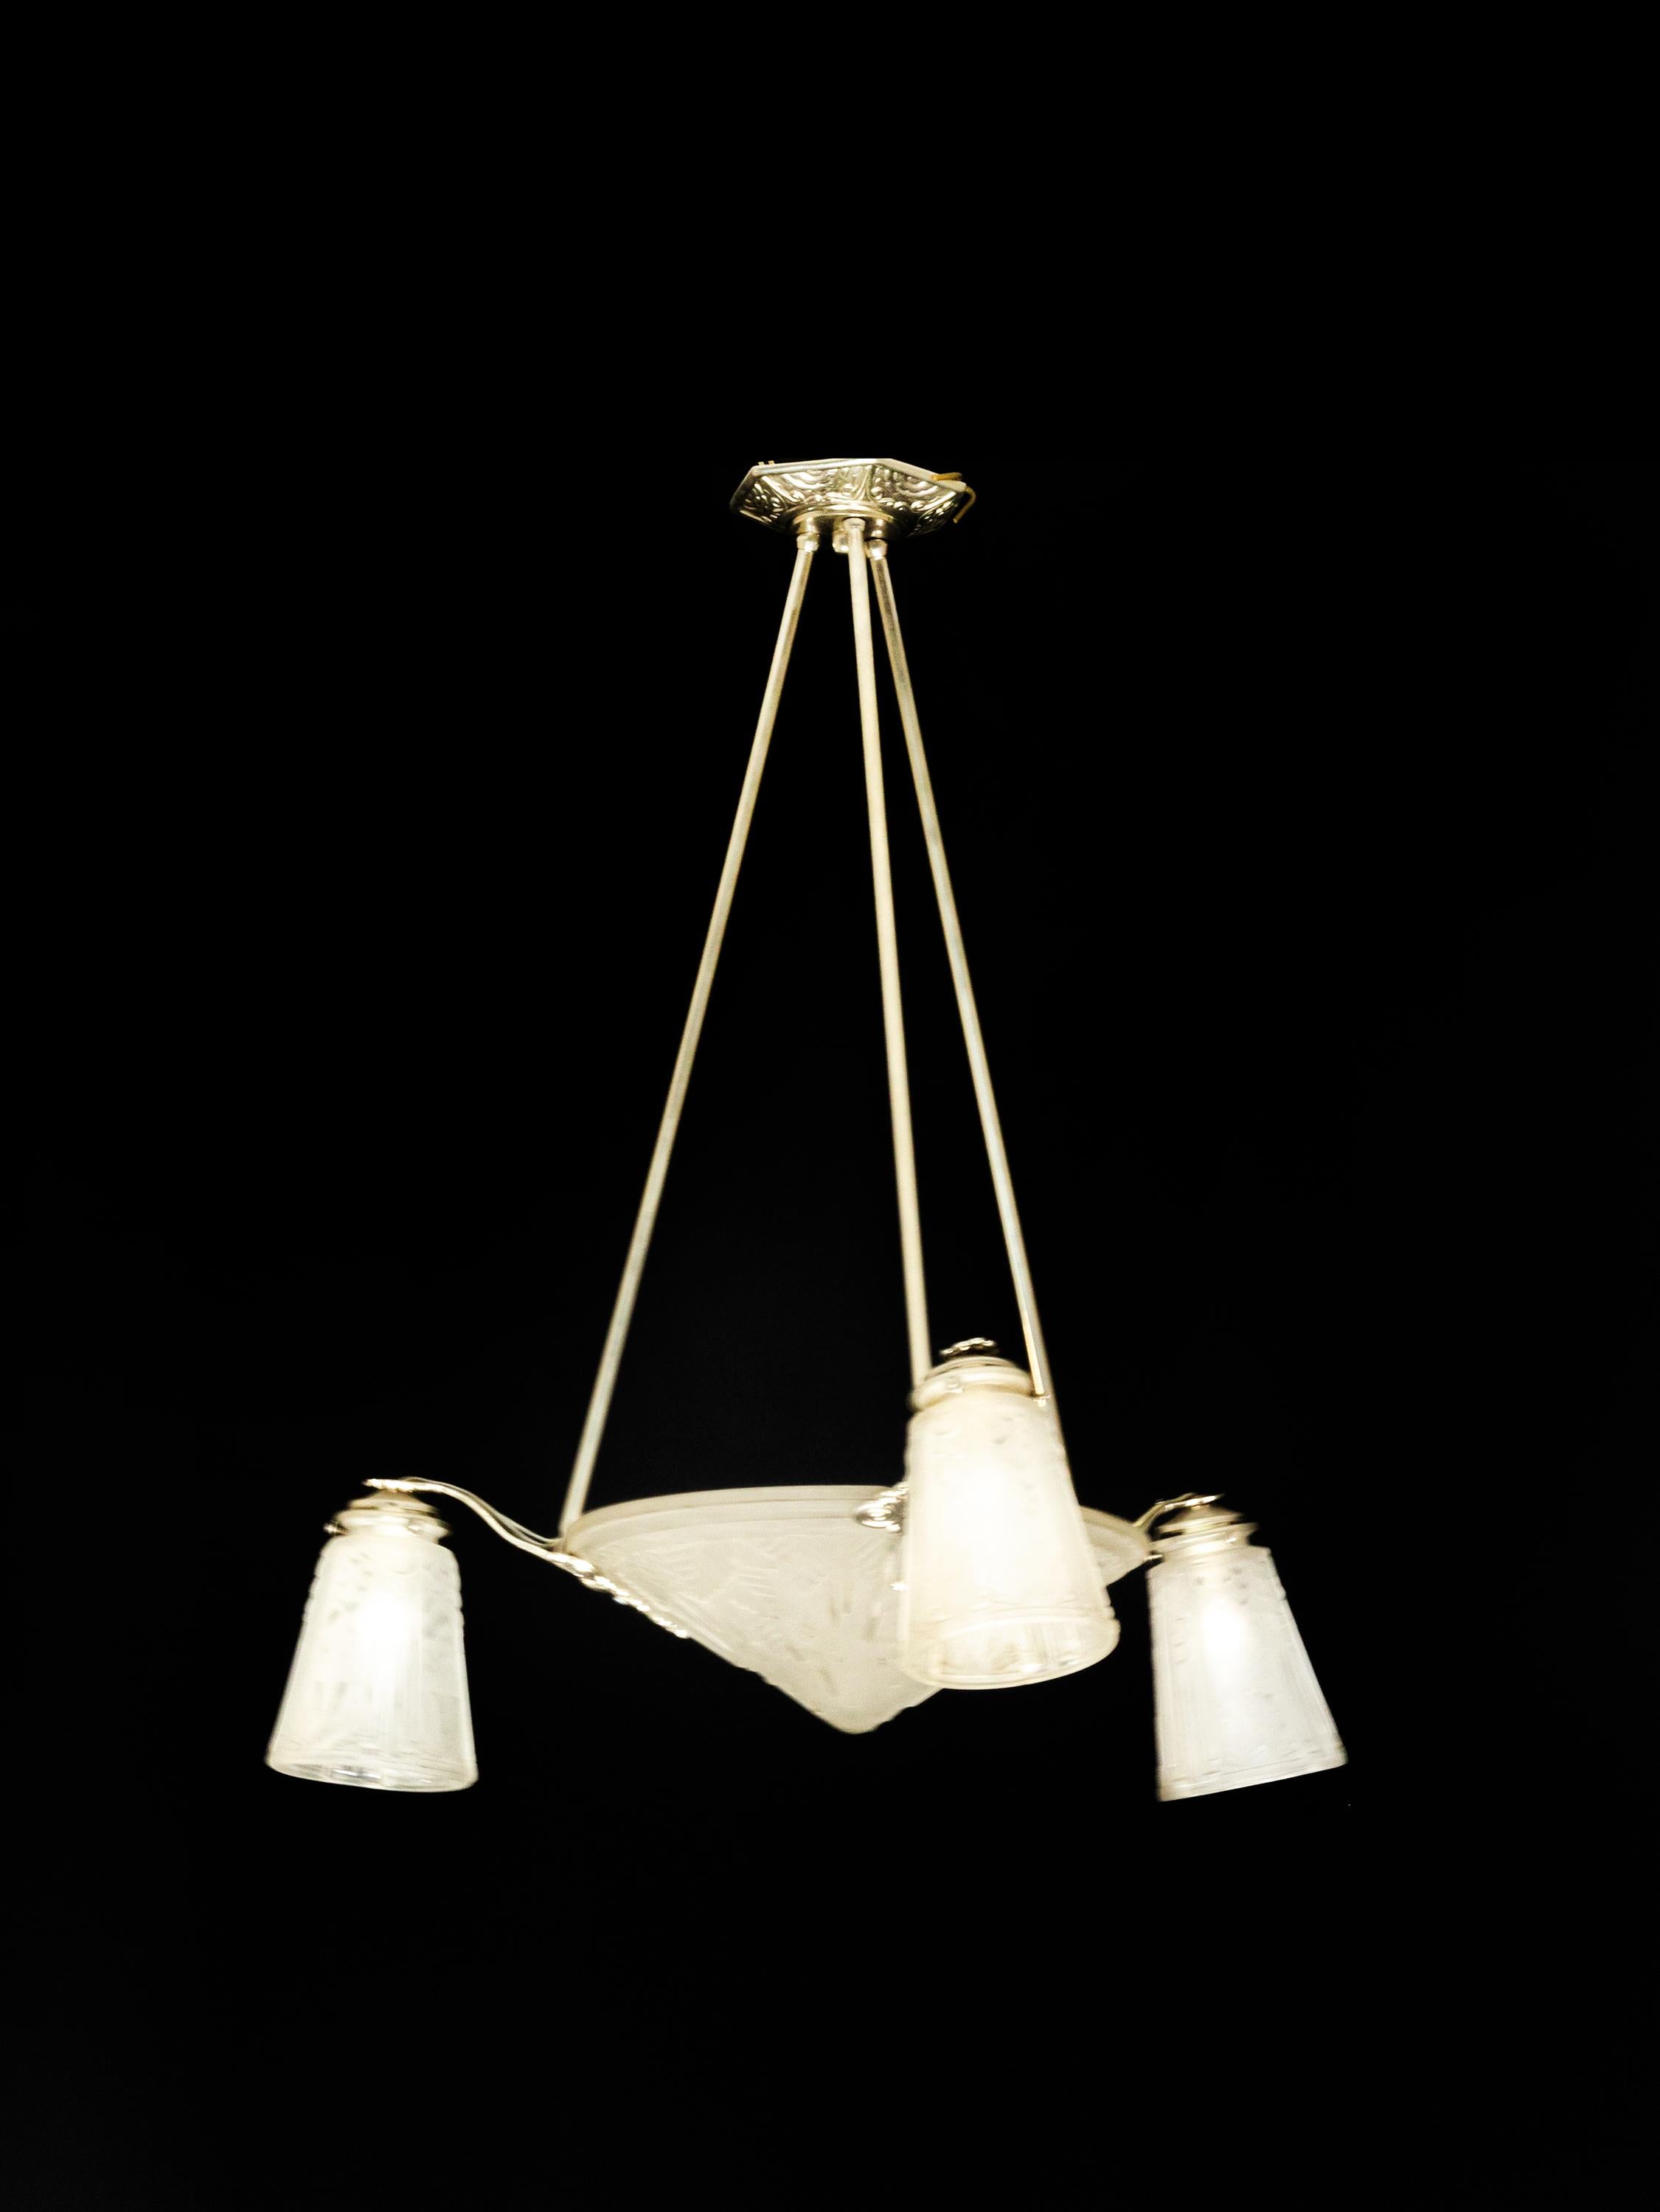 20th Century French Art Deco Chandelier Signed by Muller Freres Luneville For Sale